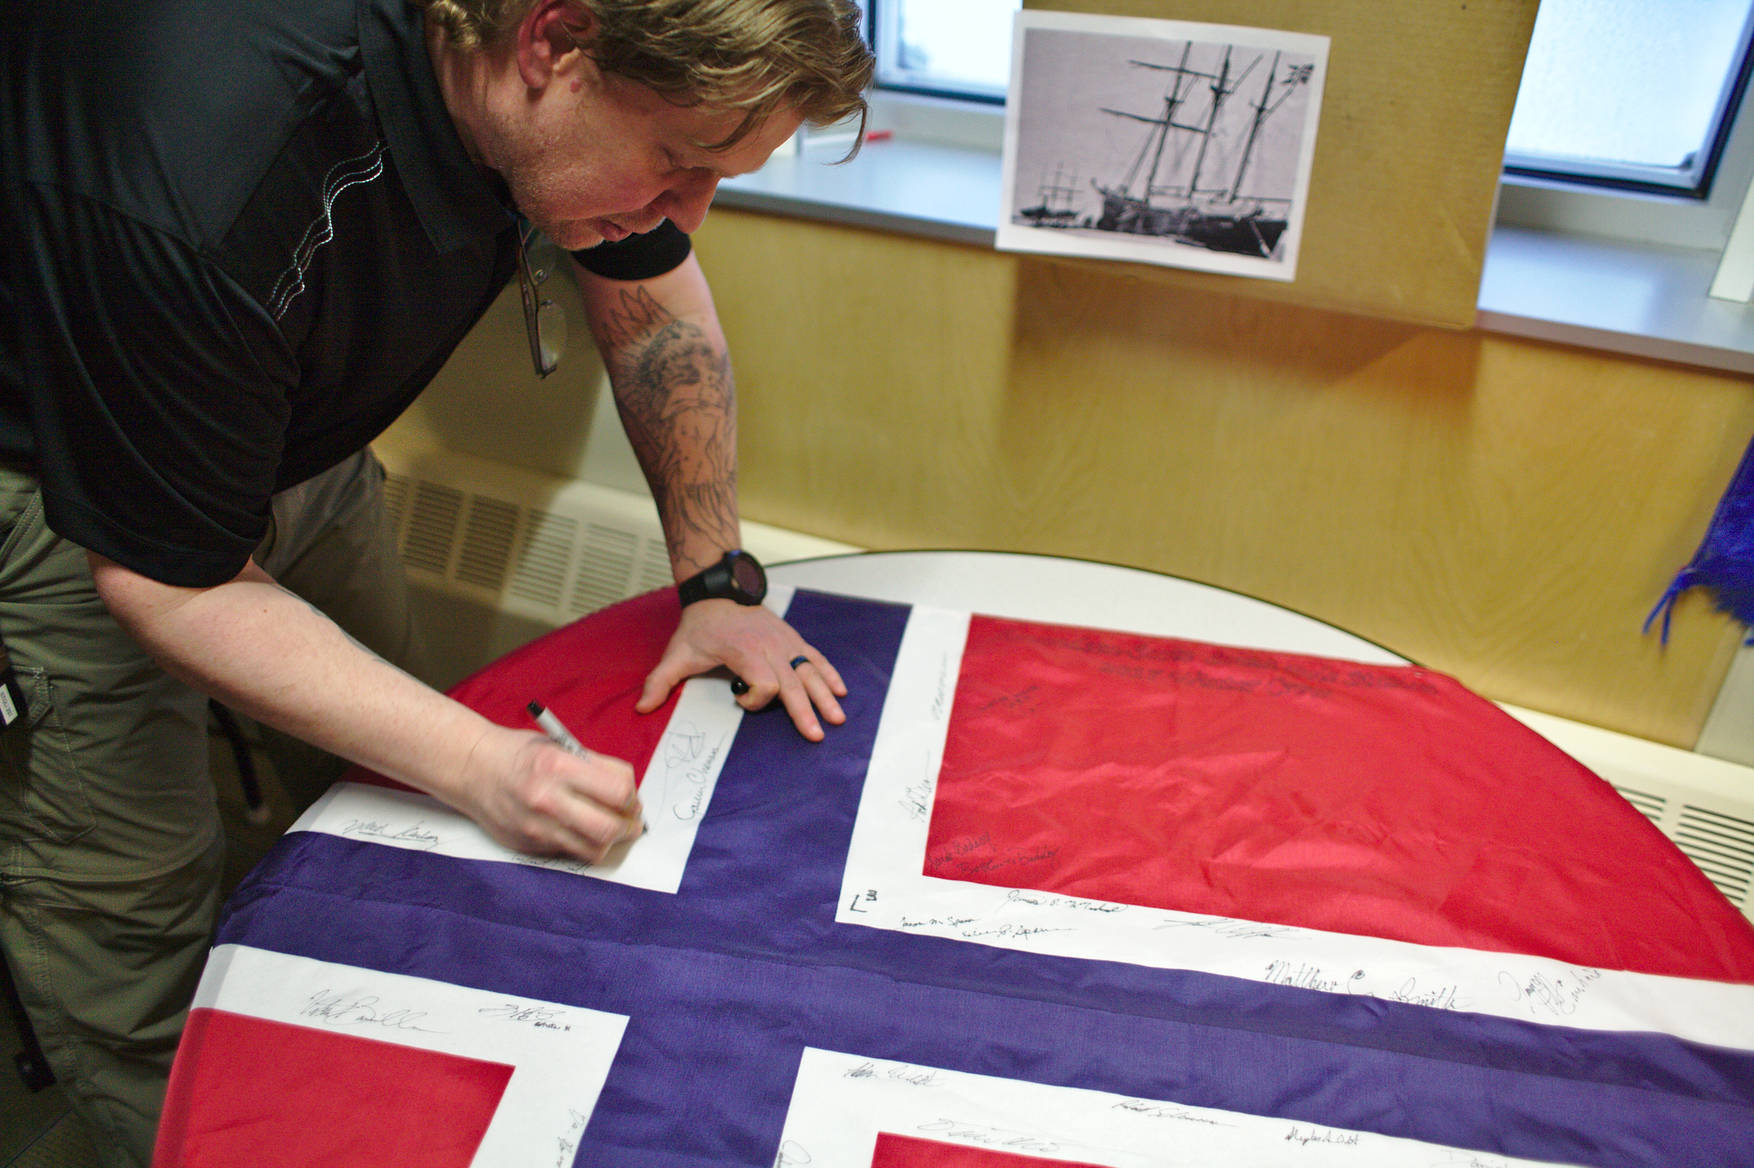 The Norwegian flag was signed by the station population. It will be taken to the polar exploration ship <em>Fram</em>, in commemoration of her use on Amundsen's 1910-12 south pole expedition (picture in the background).